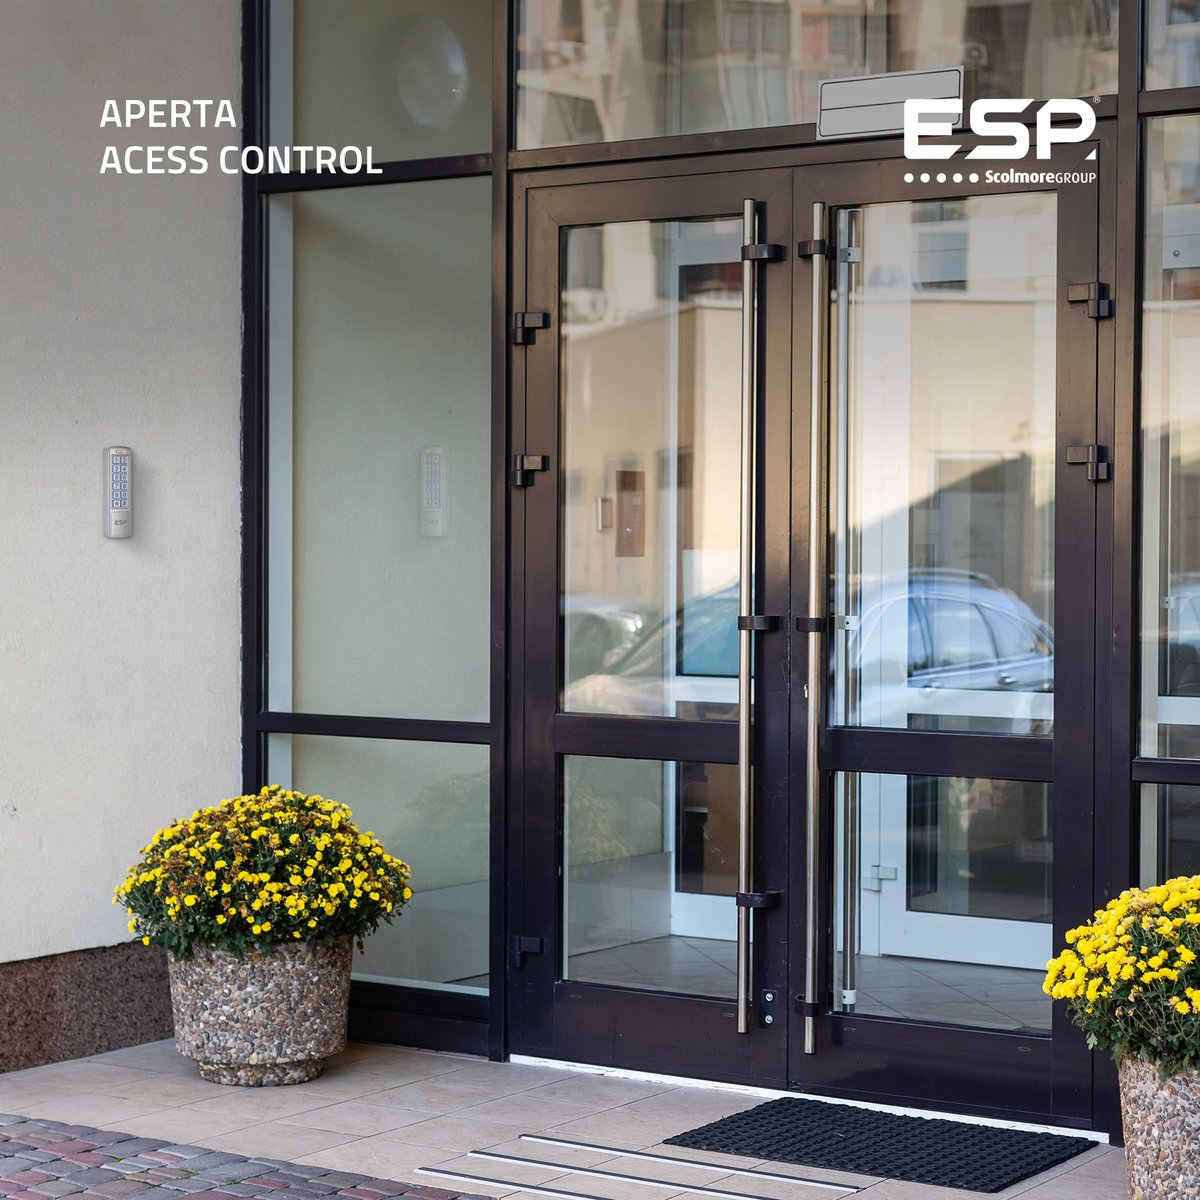 🔒 Need access control solutions for your next project? 👀 Find the ESP team at Elex in Exeter and ask about the Aperta range! Claim your FREE entry now 👉 registration.hamerville.events/exf/3esguxeysl… #ESP #AccessControl #Aperta